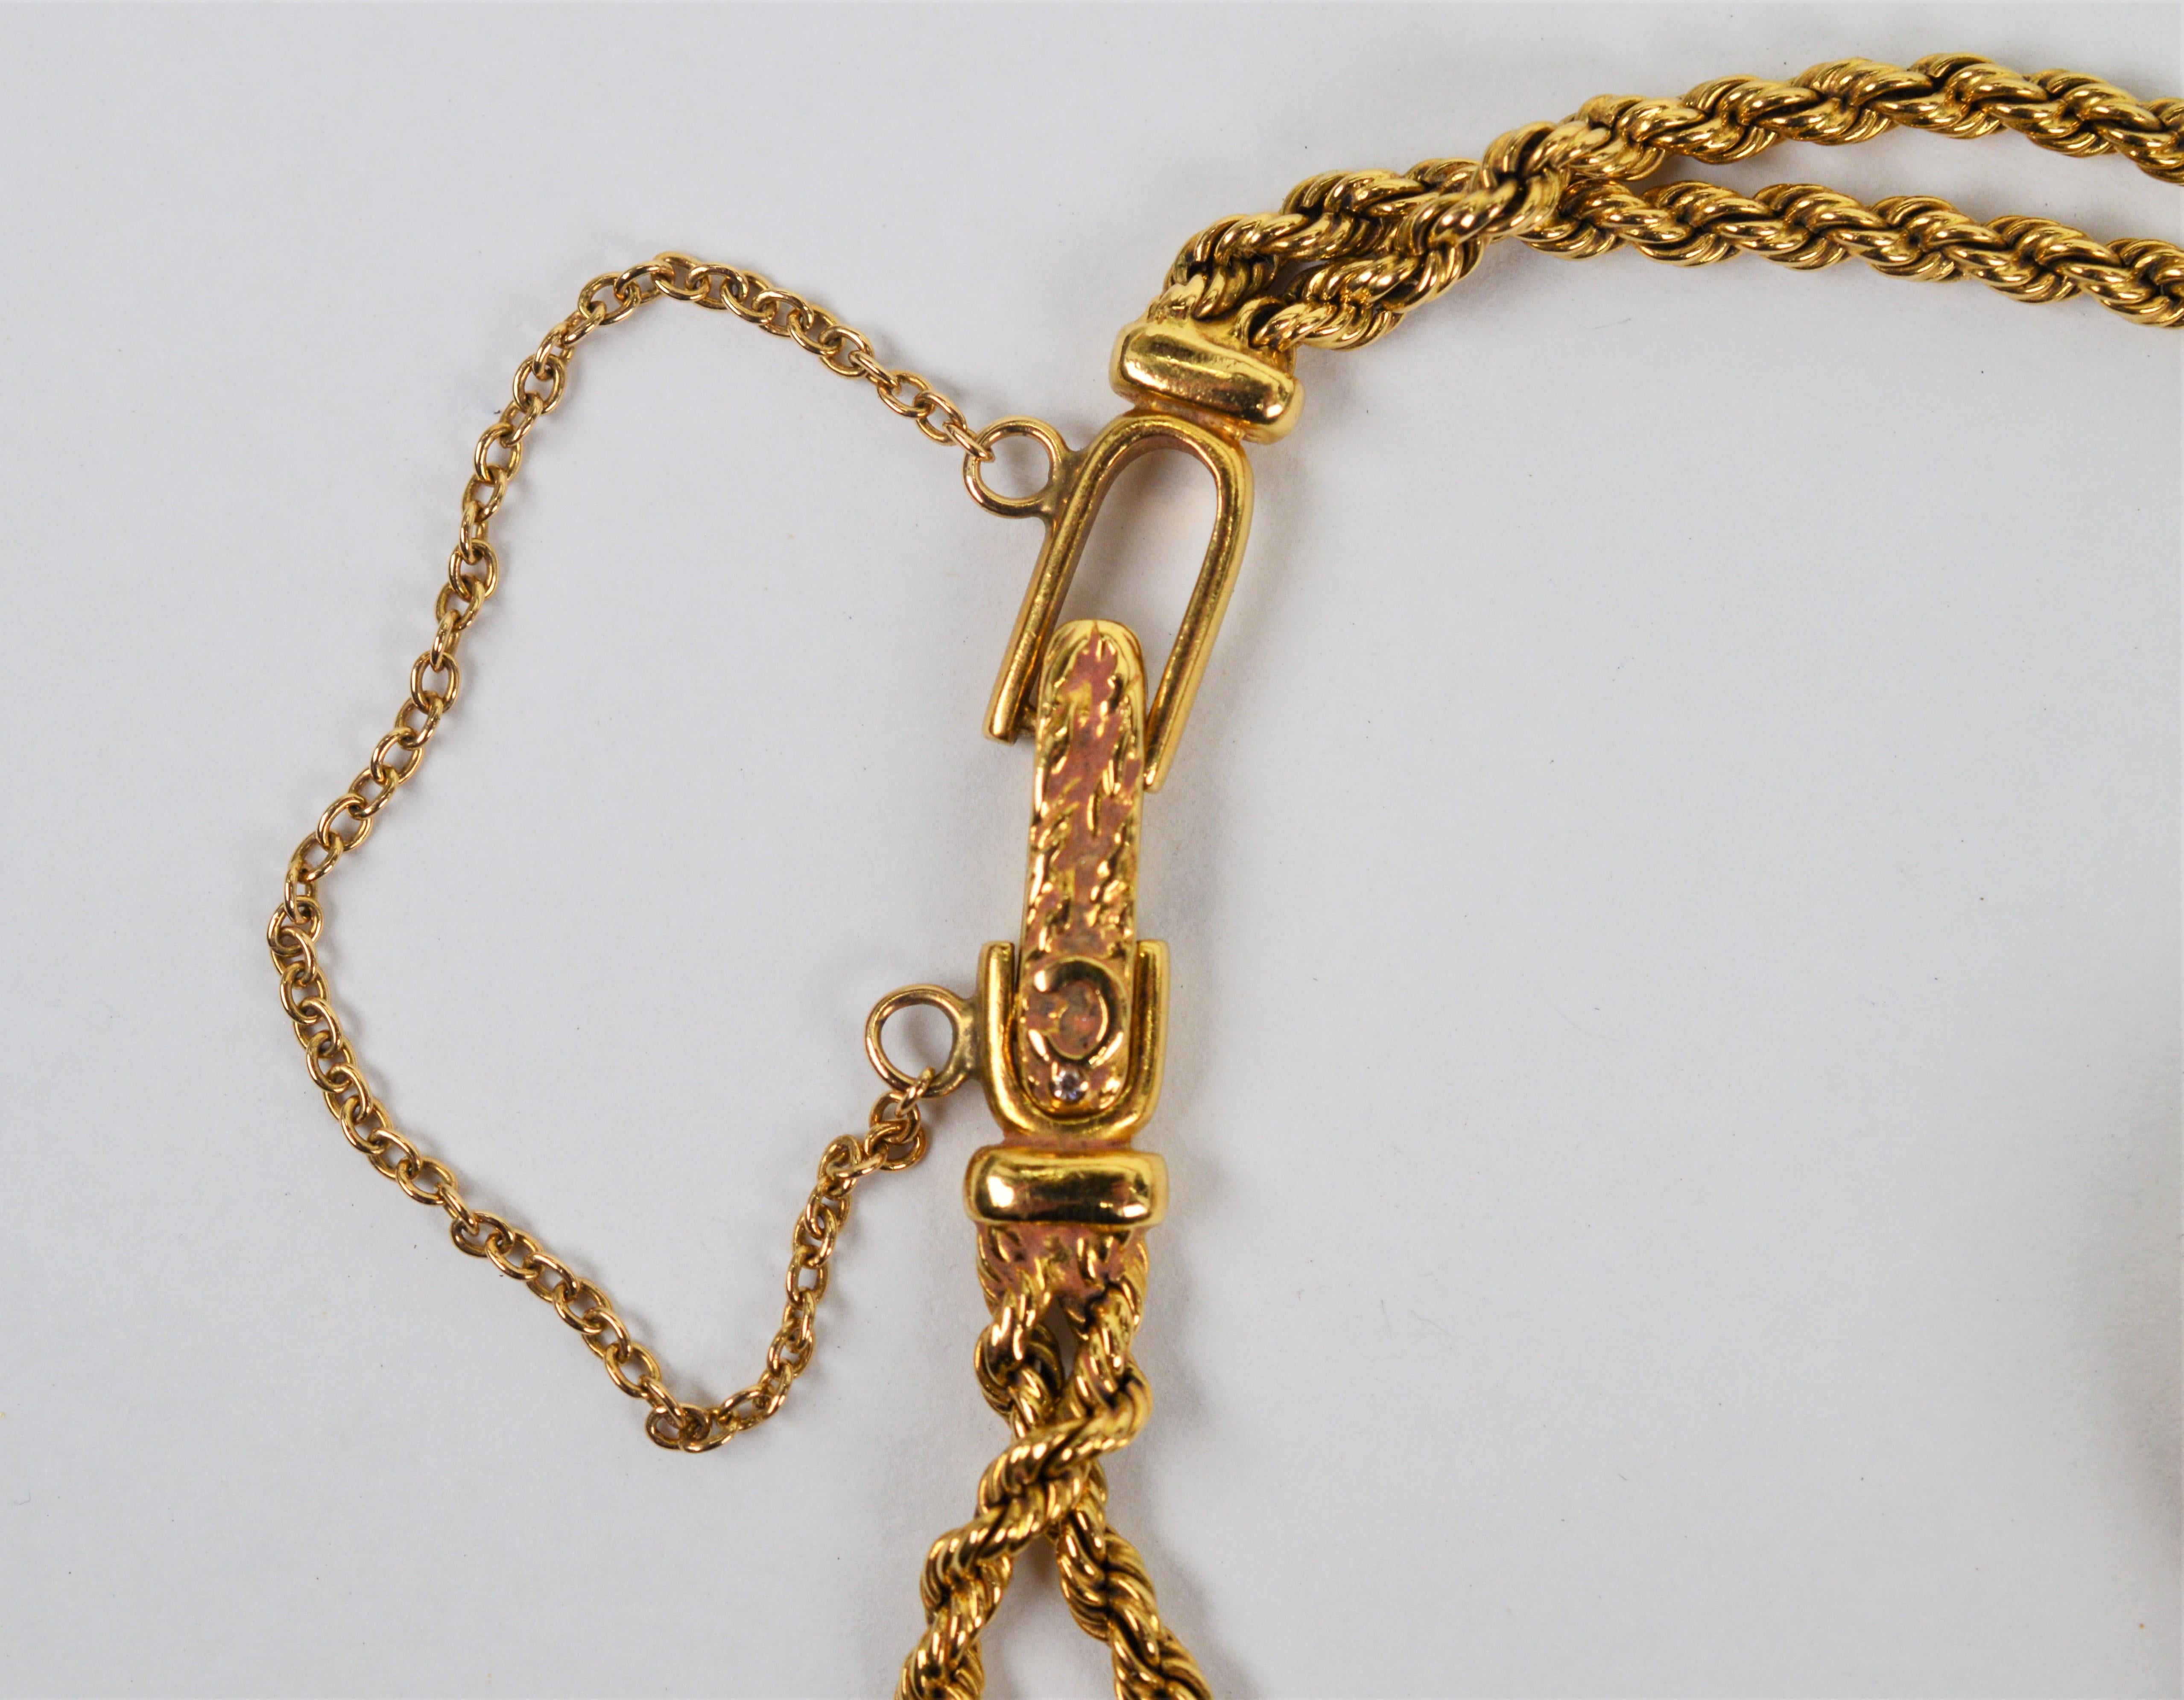 Chopard 18 Karat Yellow Gold Happy Diamond Bracelet Watch In Excellent Condition For Sale In Mount Kisco, NY